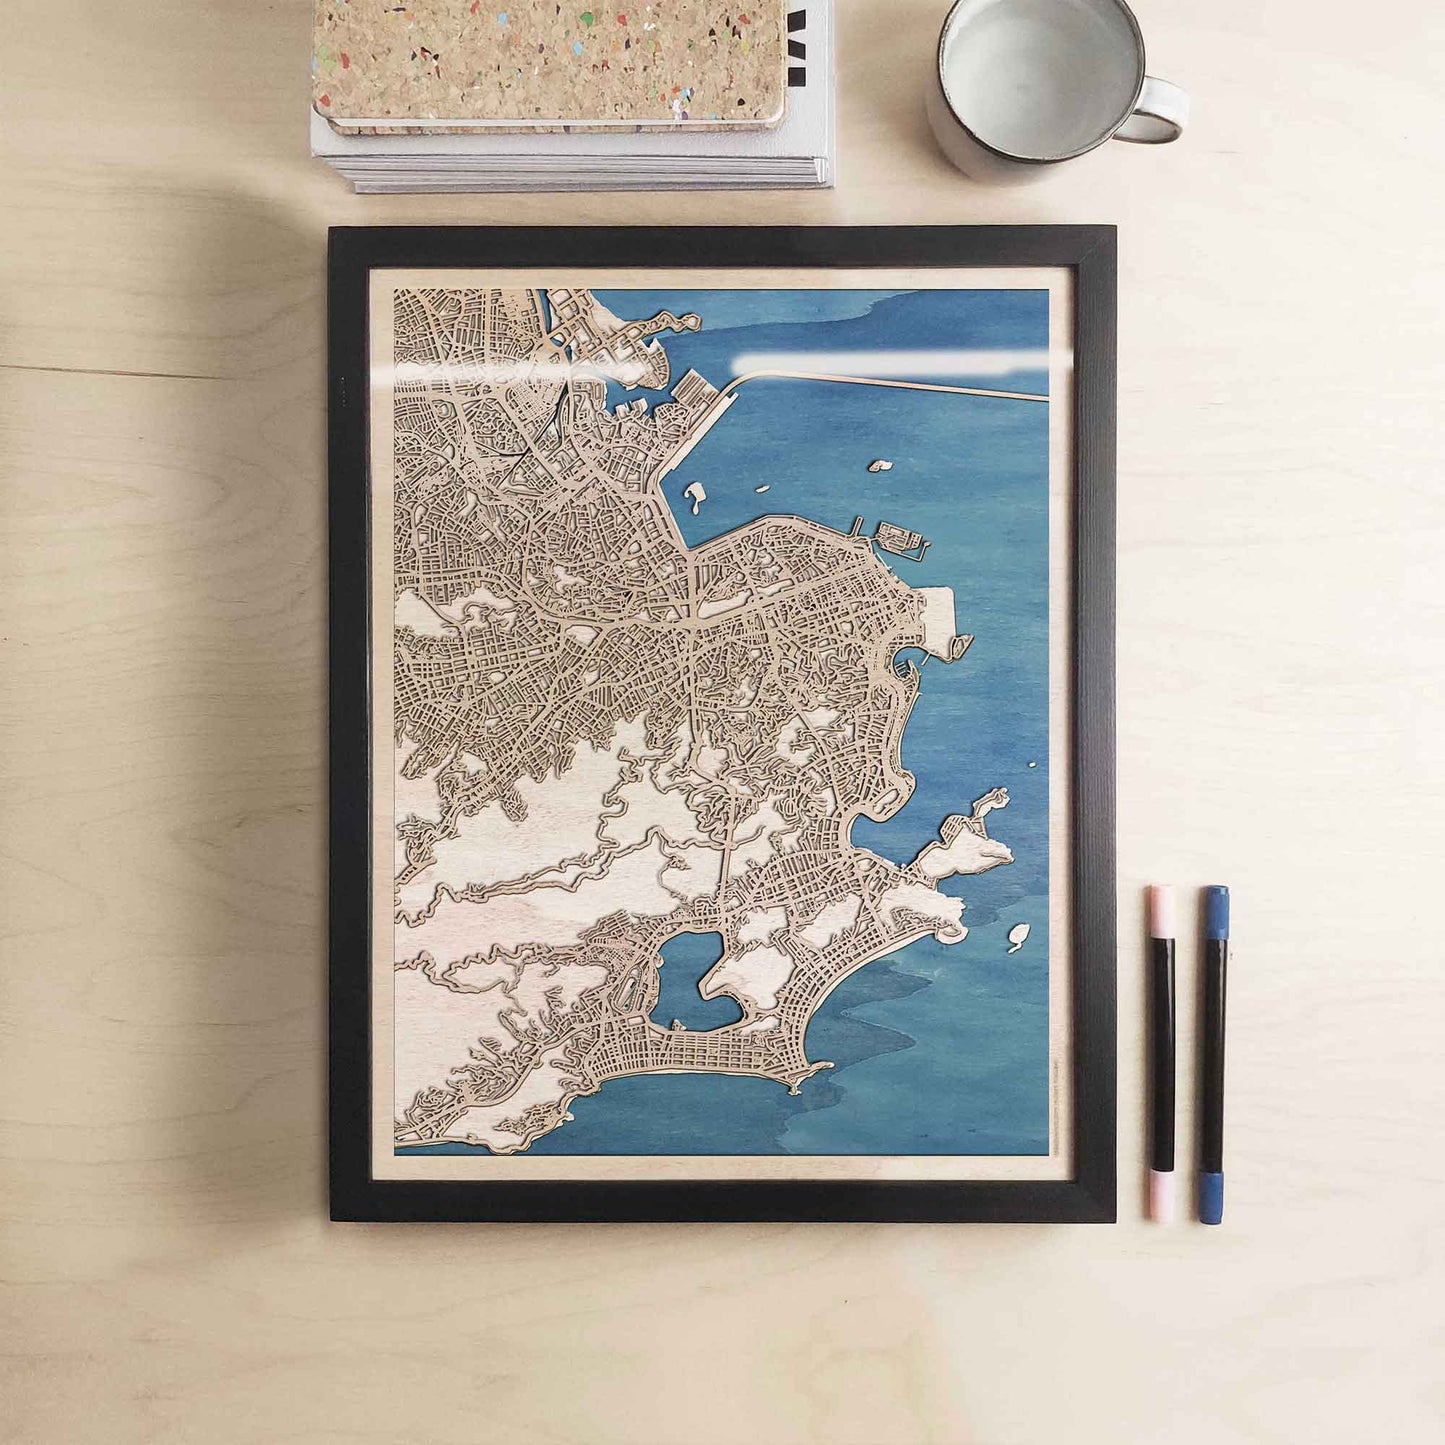 Rio de Janeiro Wooden Map by CityWood - Custom Wood Map Art - Unique Laser Cut Engraved - Anniversary Gift